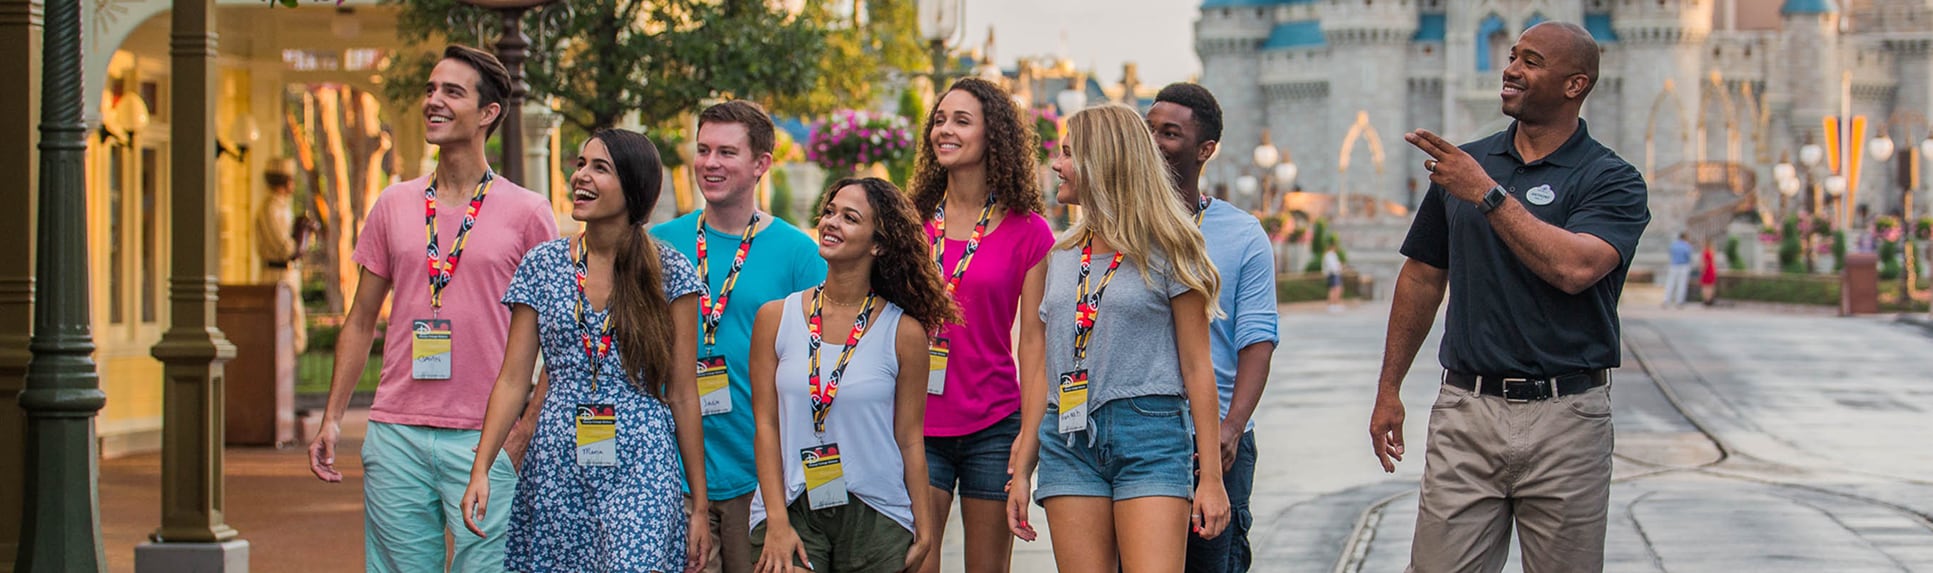 A Disney Cast Member leading a group of young adults through Magic Kingdom Park